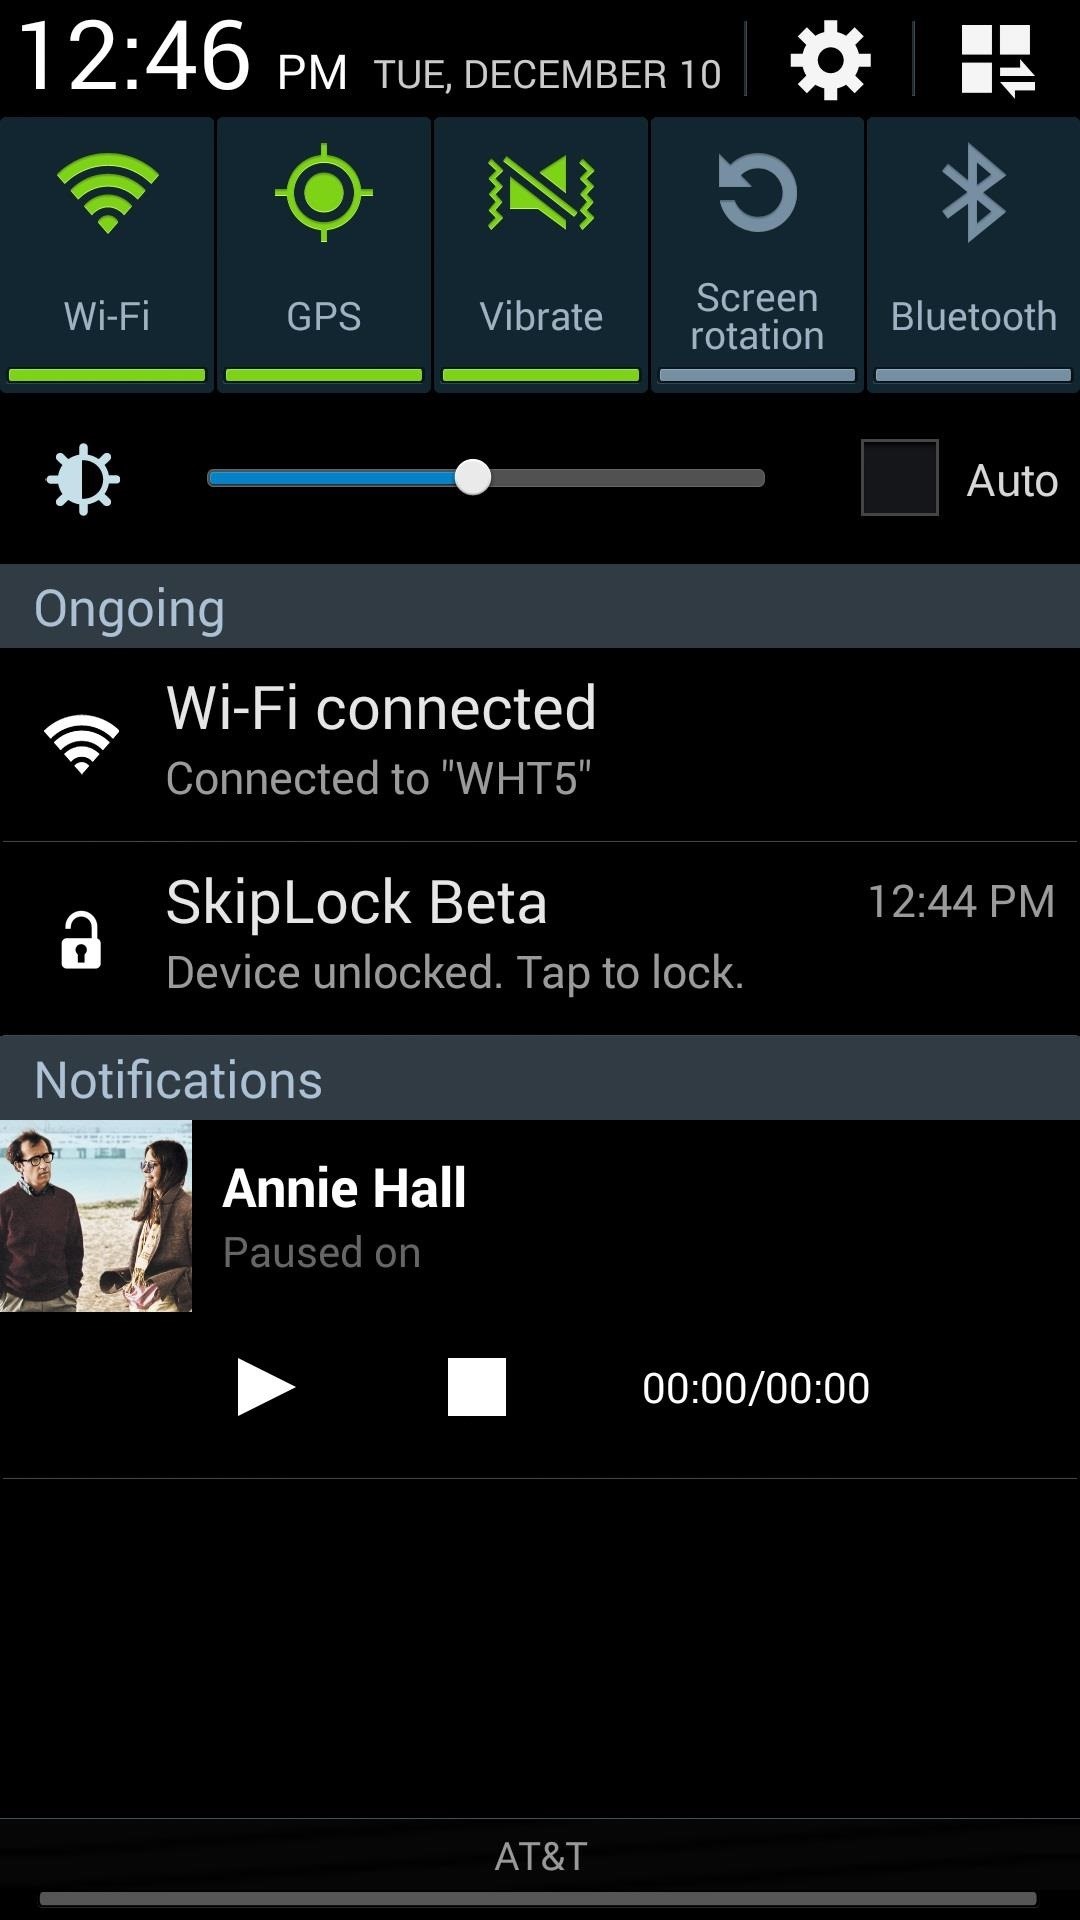 How to Skip Lock Screen Security on Your Samsung Galaxy Note 3 When Using Trusted Networks